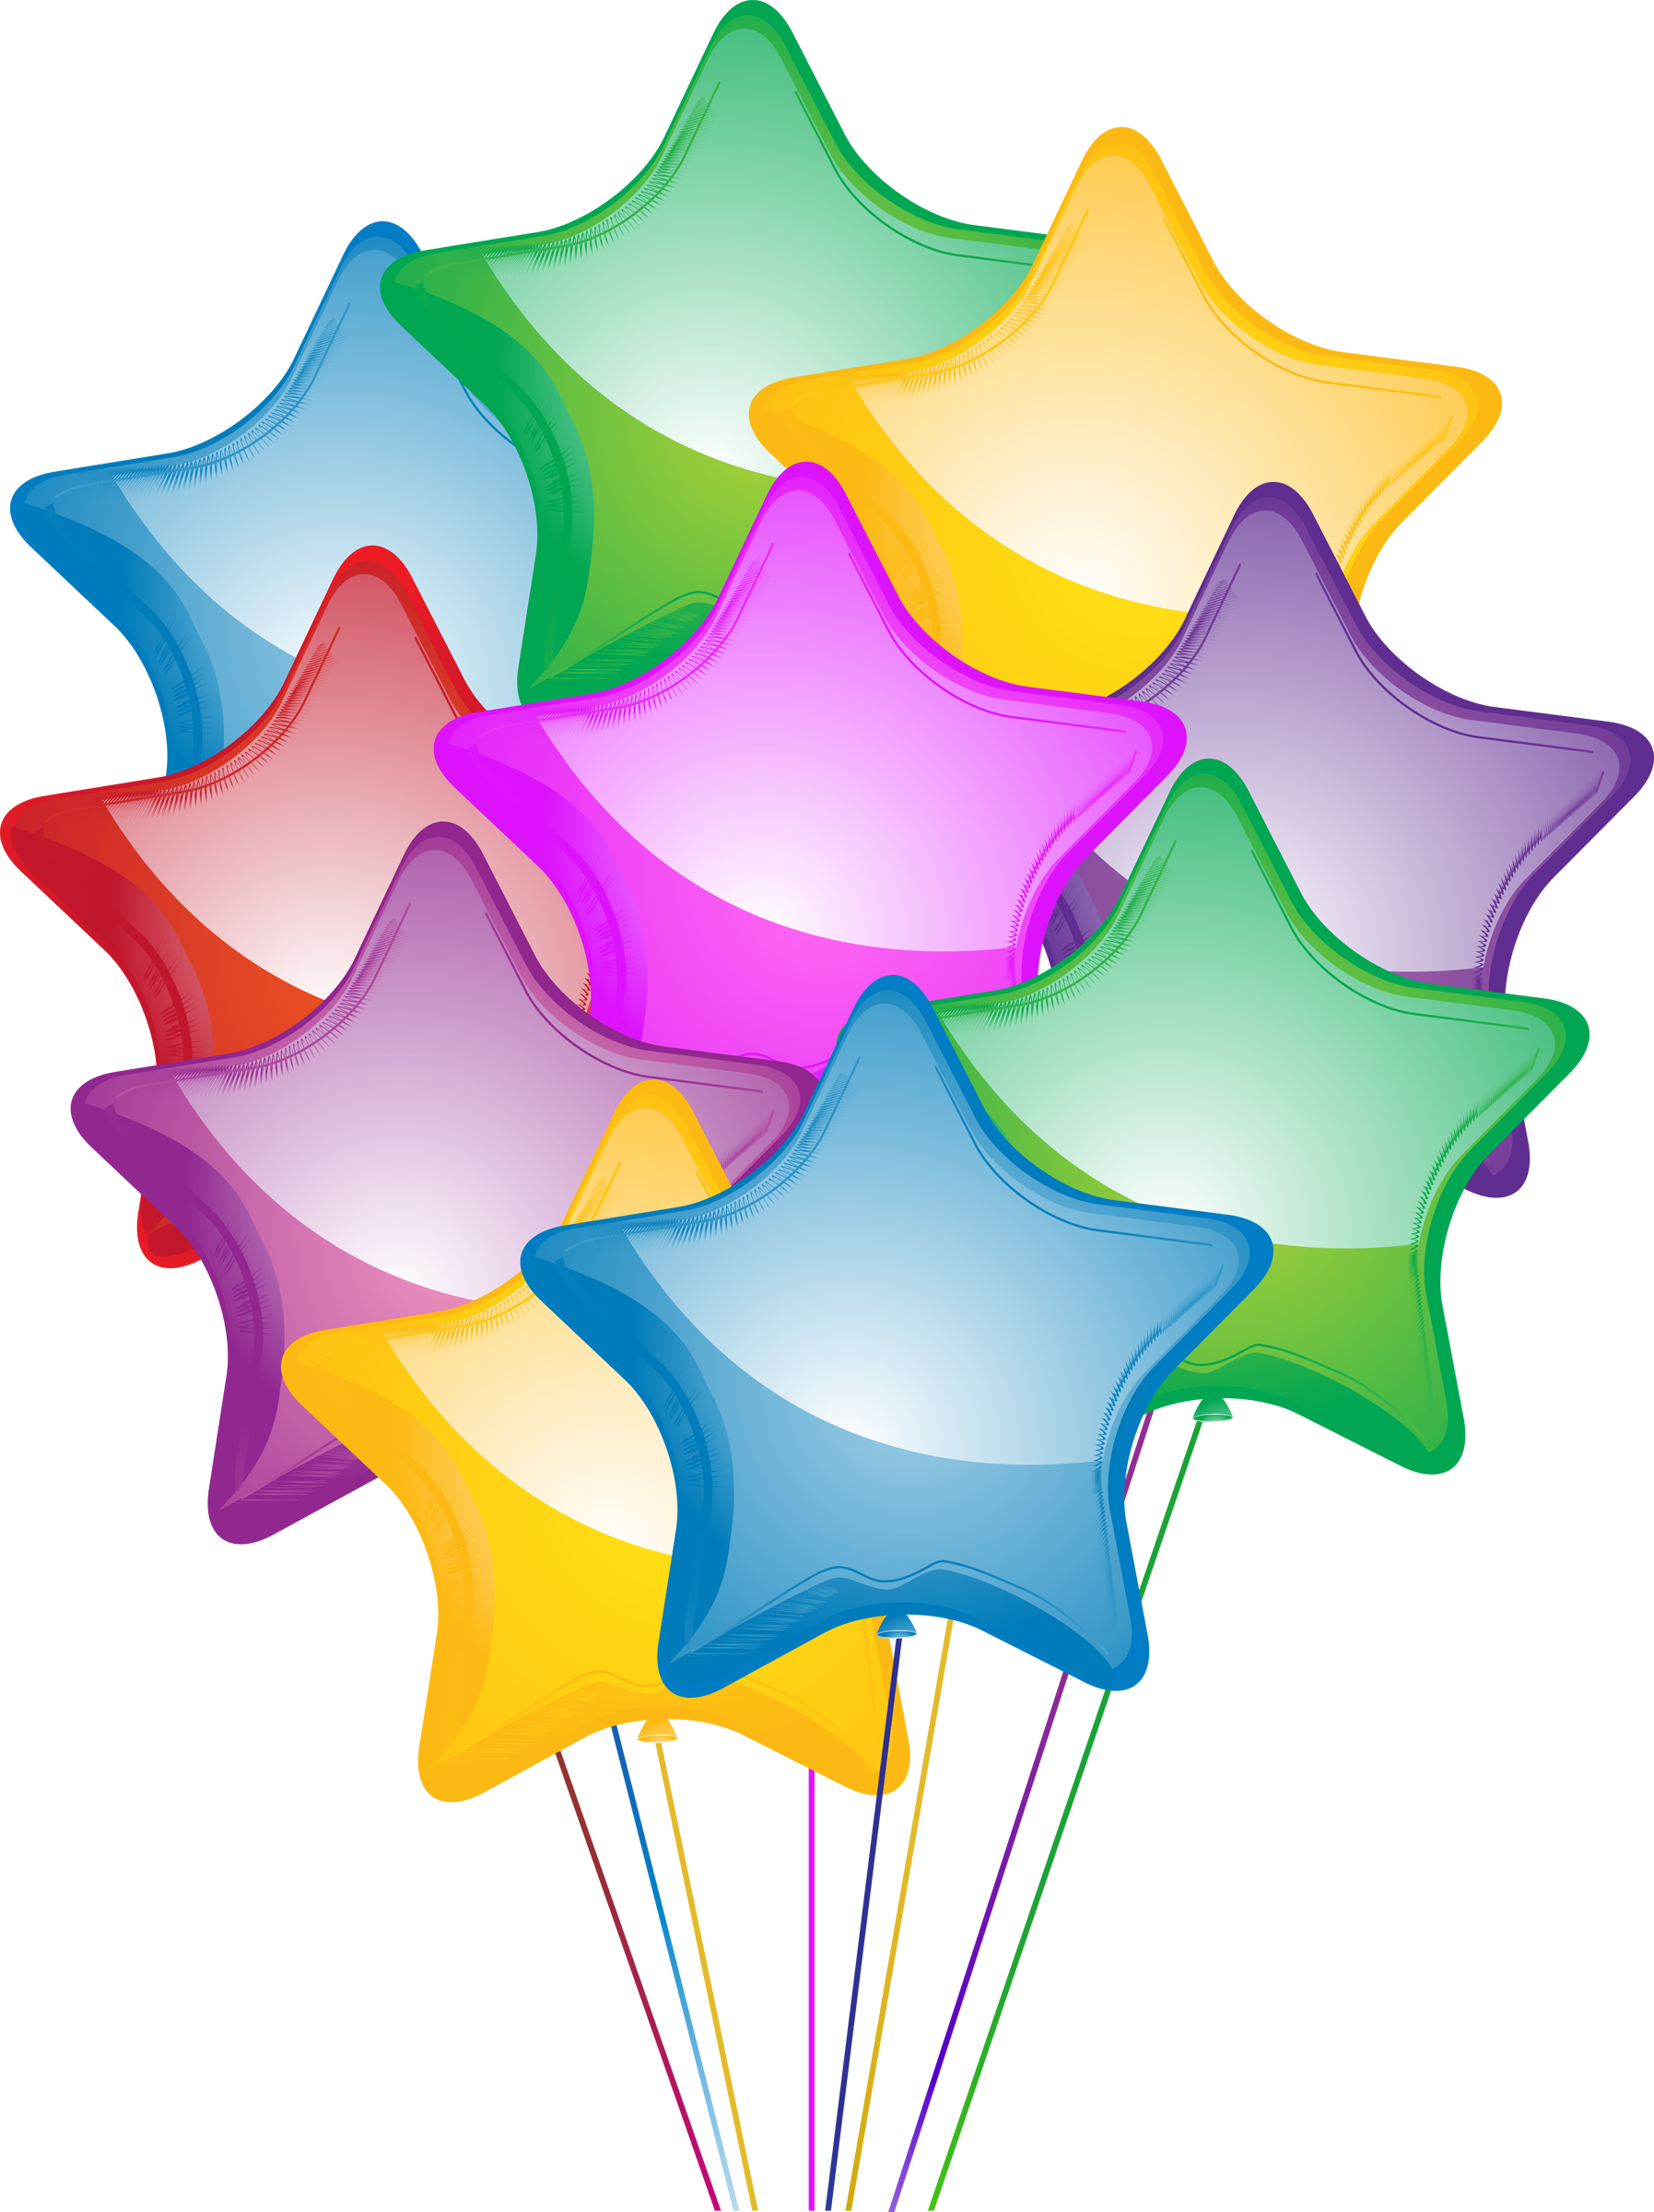 Free Birthday Balloons Png, Download Free Clip Art, Free.